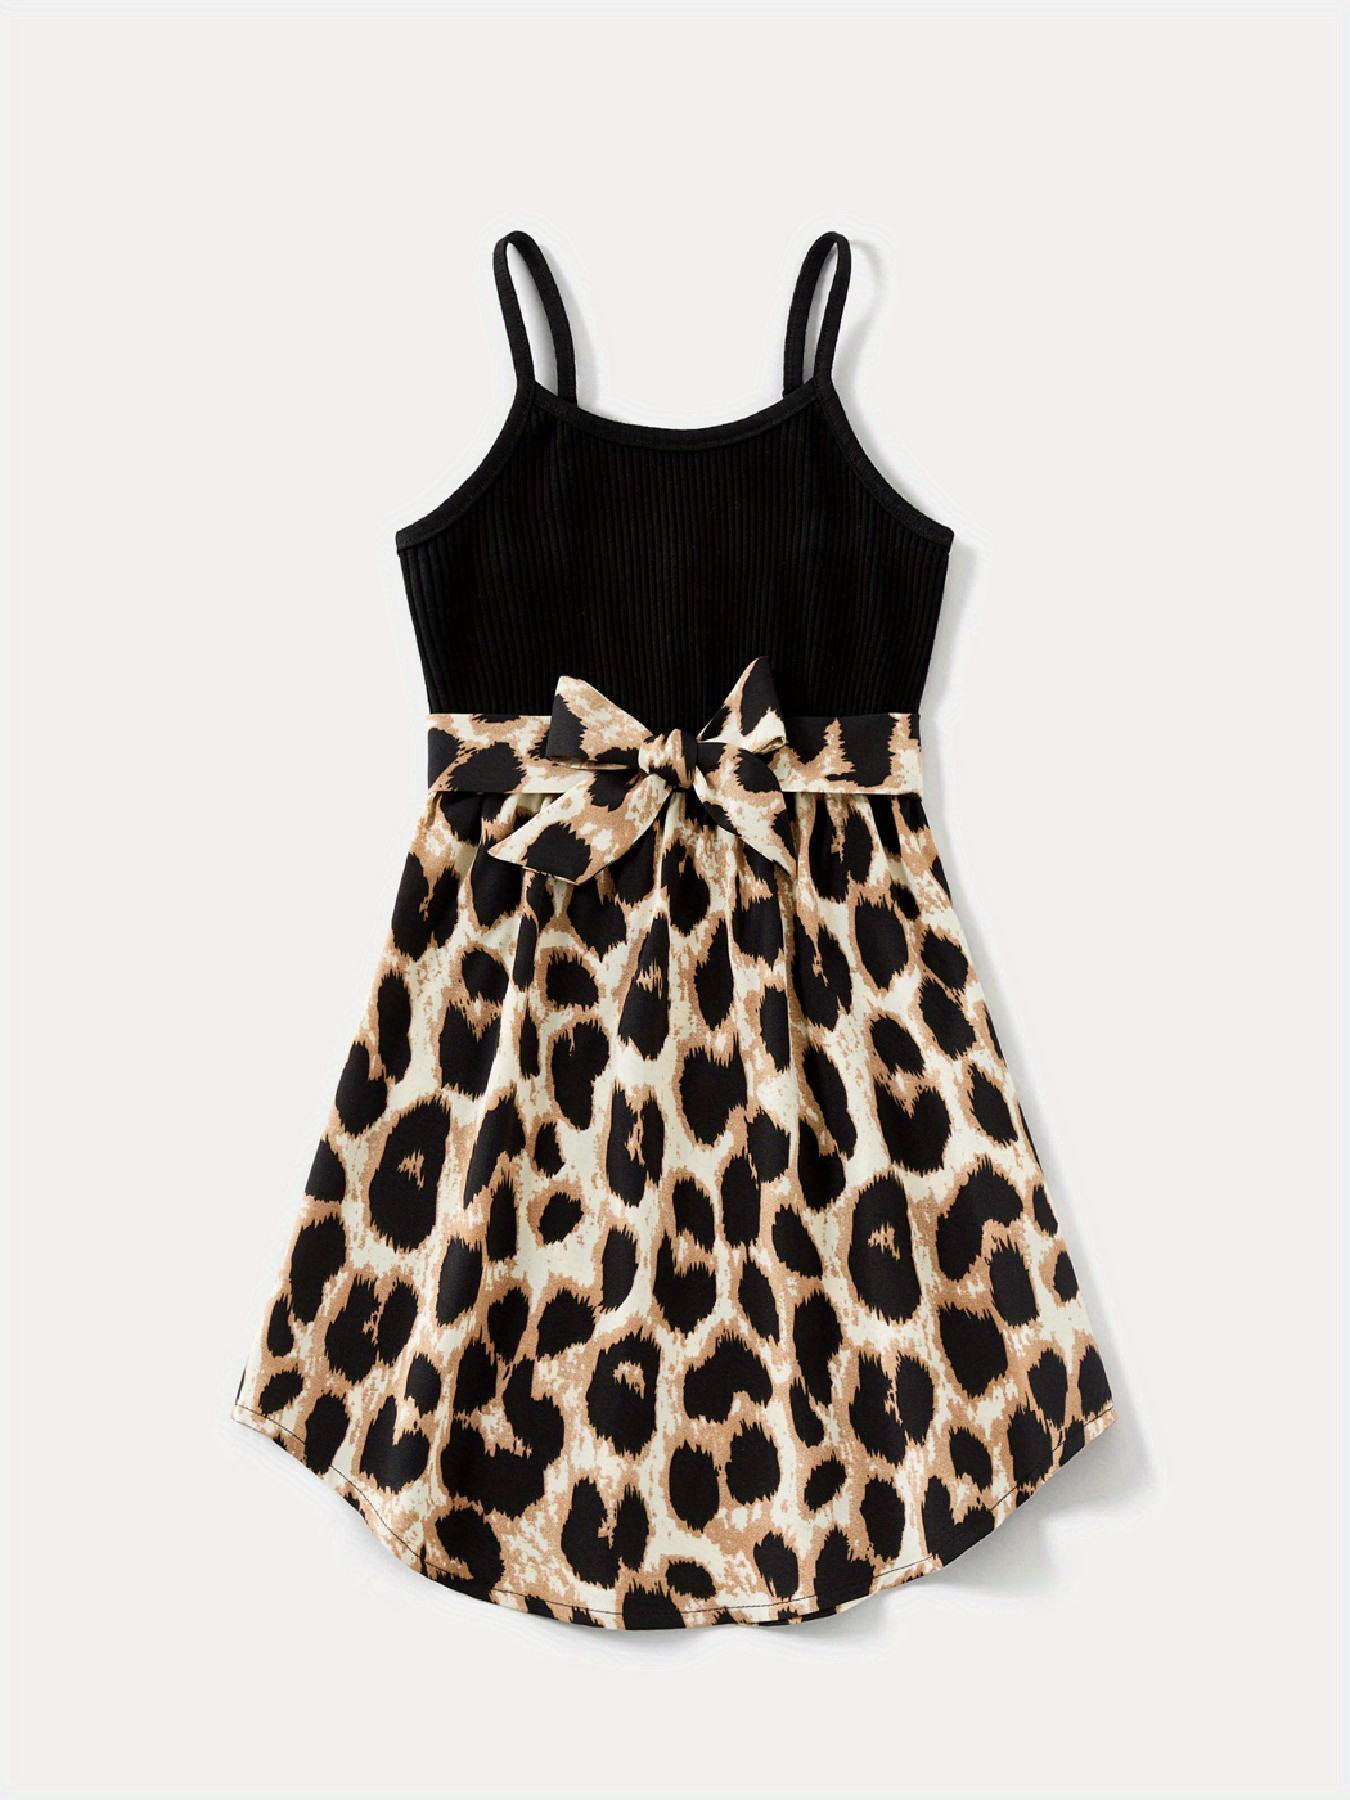 Leopard Print Family Matching Sets（Spaghetti Strap Belted Tulip Hem Dresses and Short-sleeve T-shirts ）